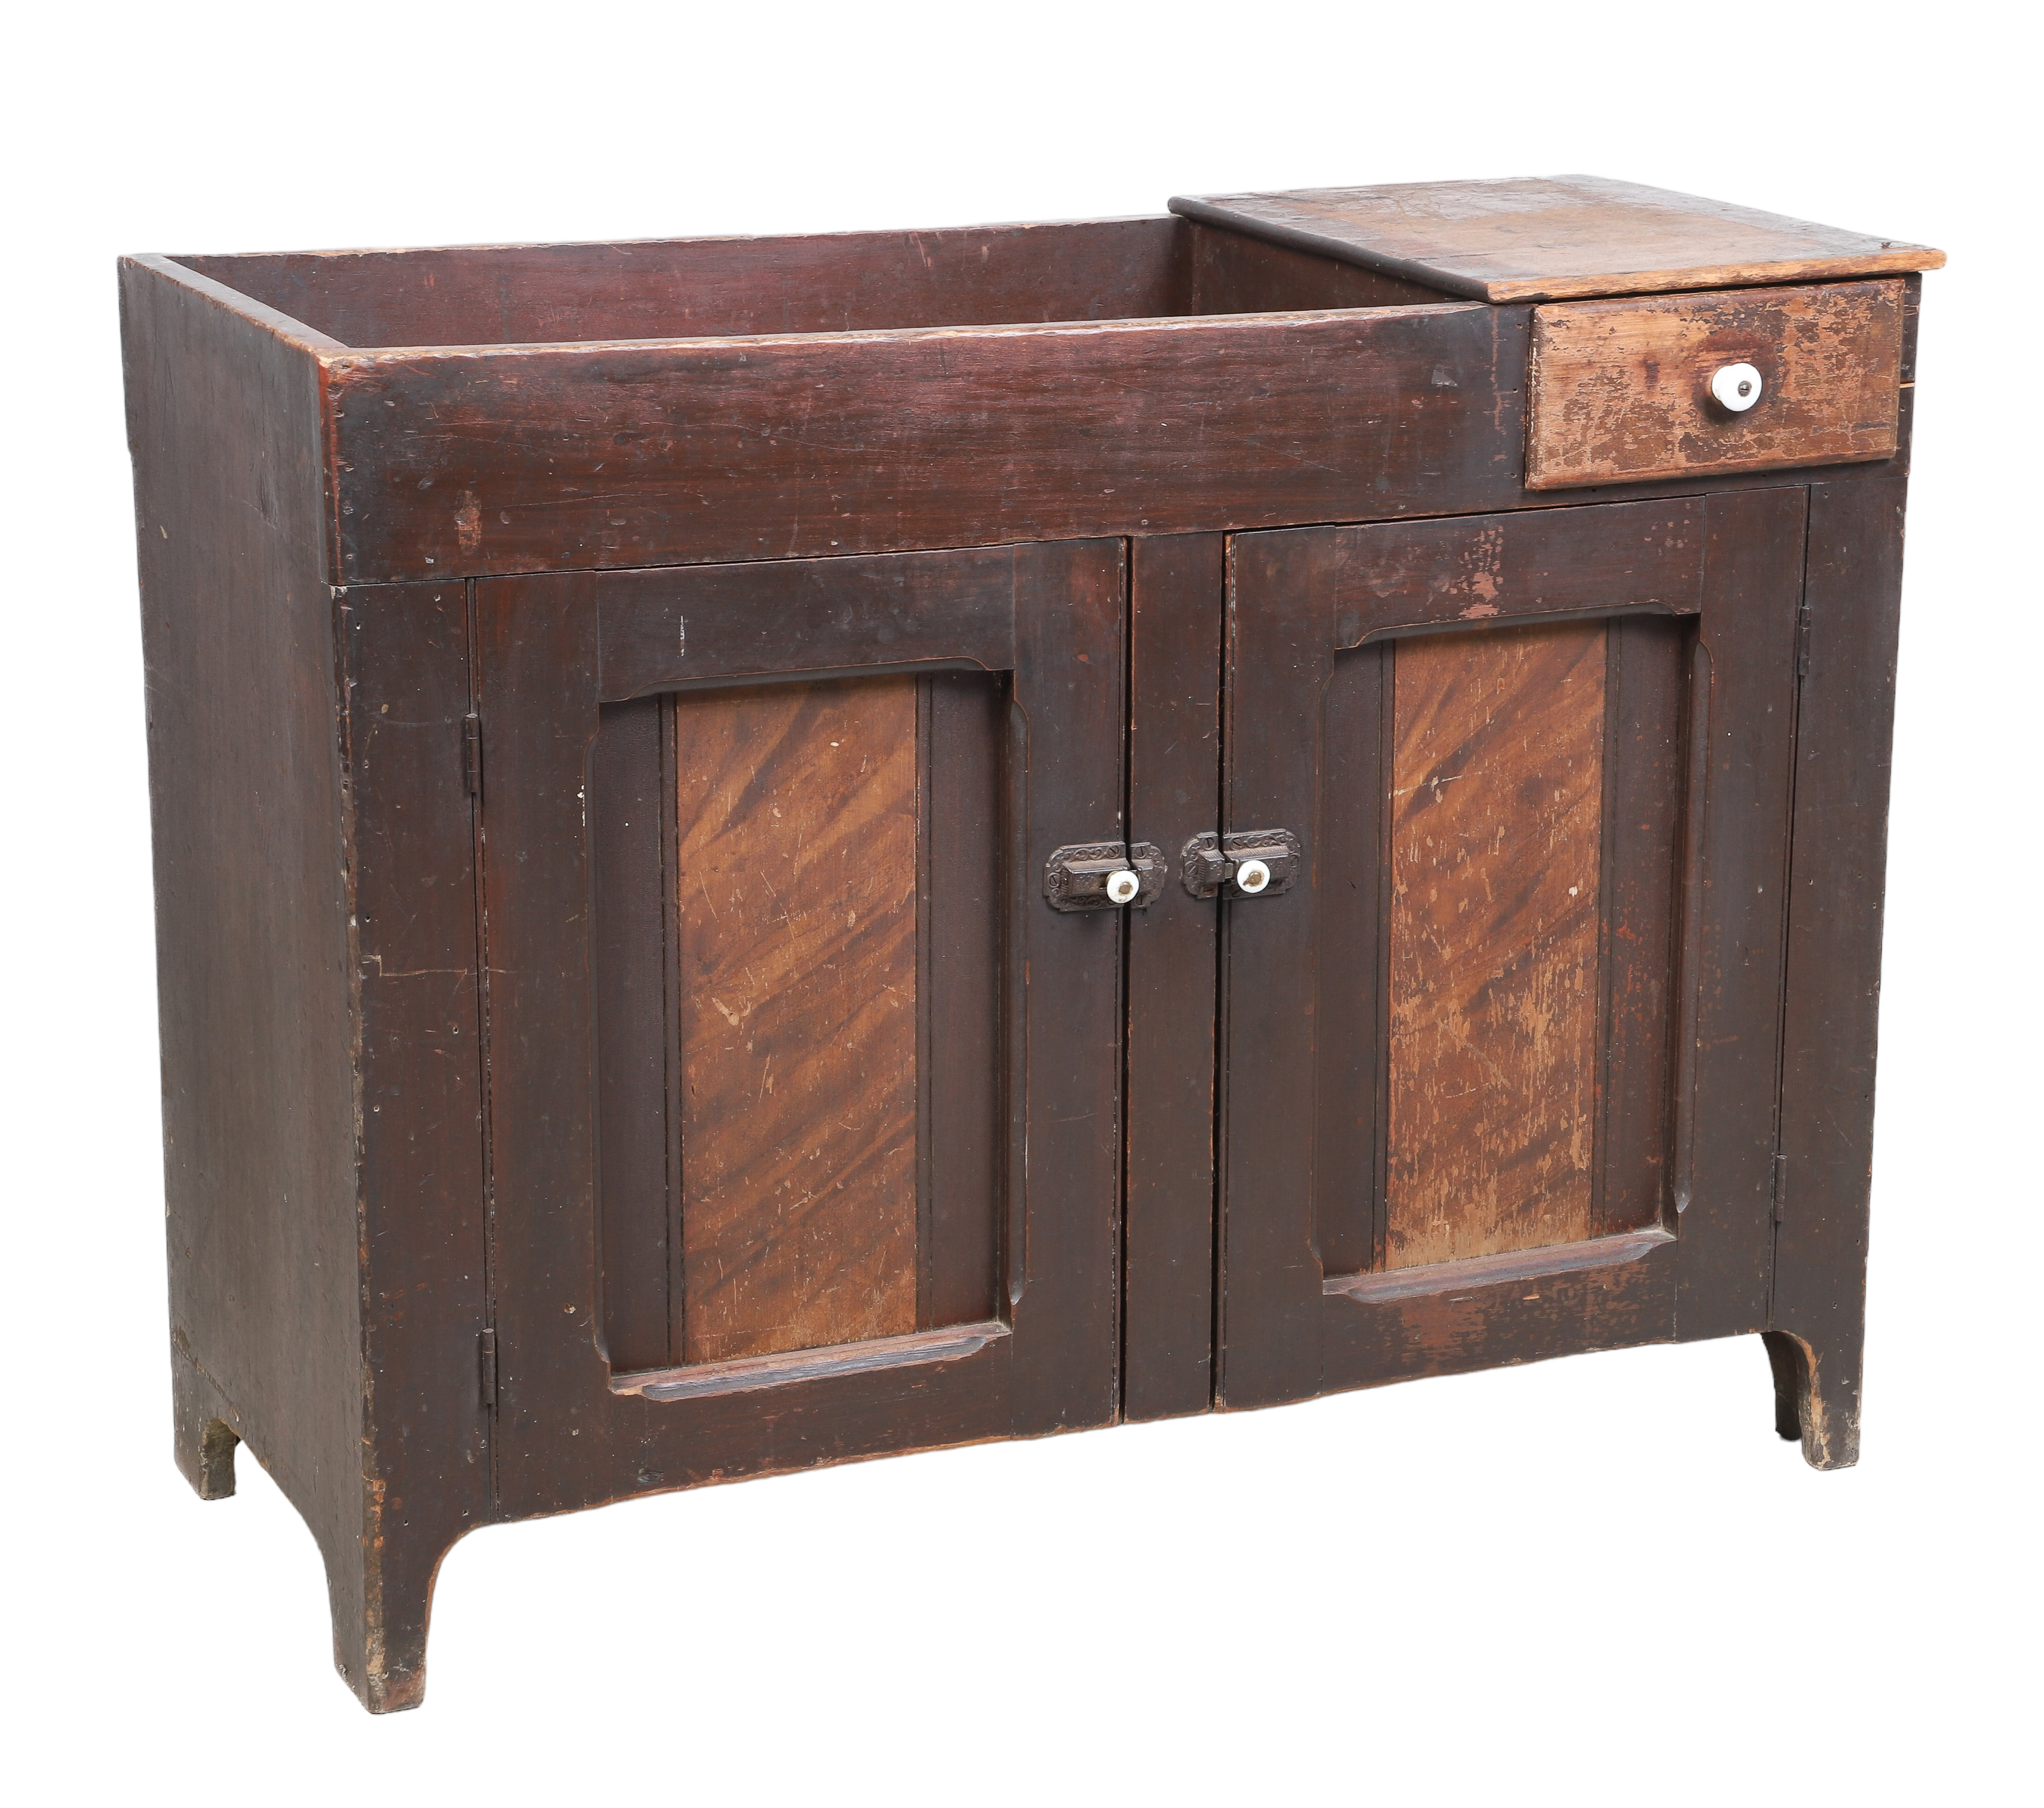 Pine dry sink, short drawer over two